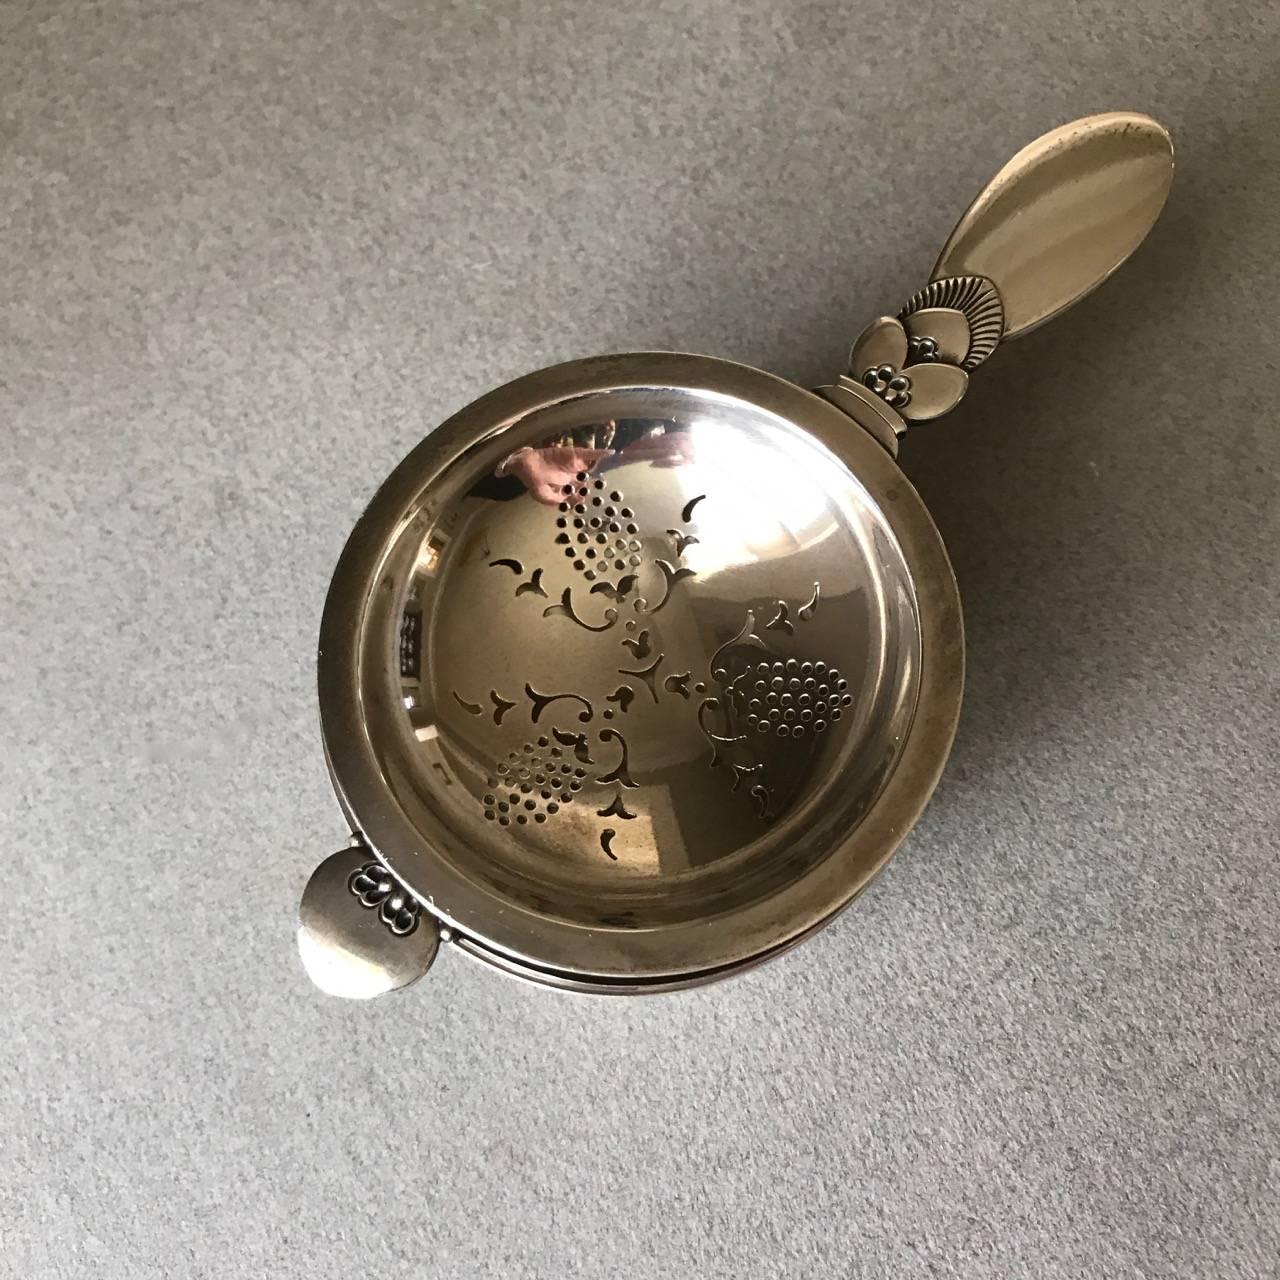 20th Century Georg Jensen Sterling Silver Cactus Tea Strainer on Stand No 646A Very Rare